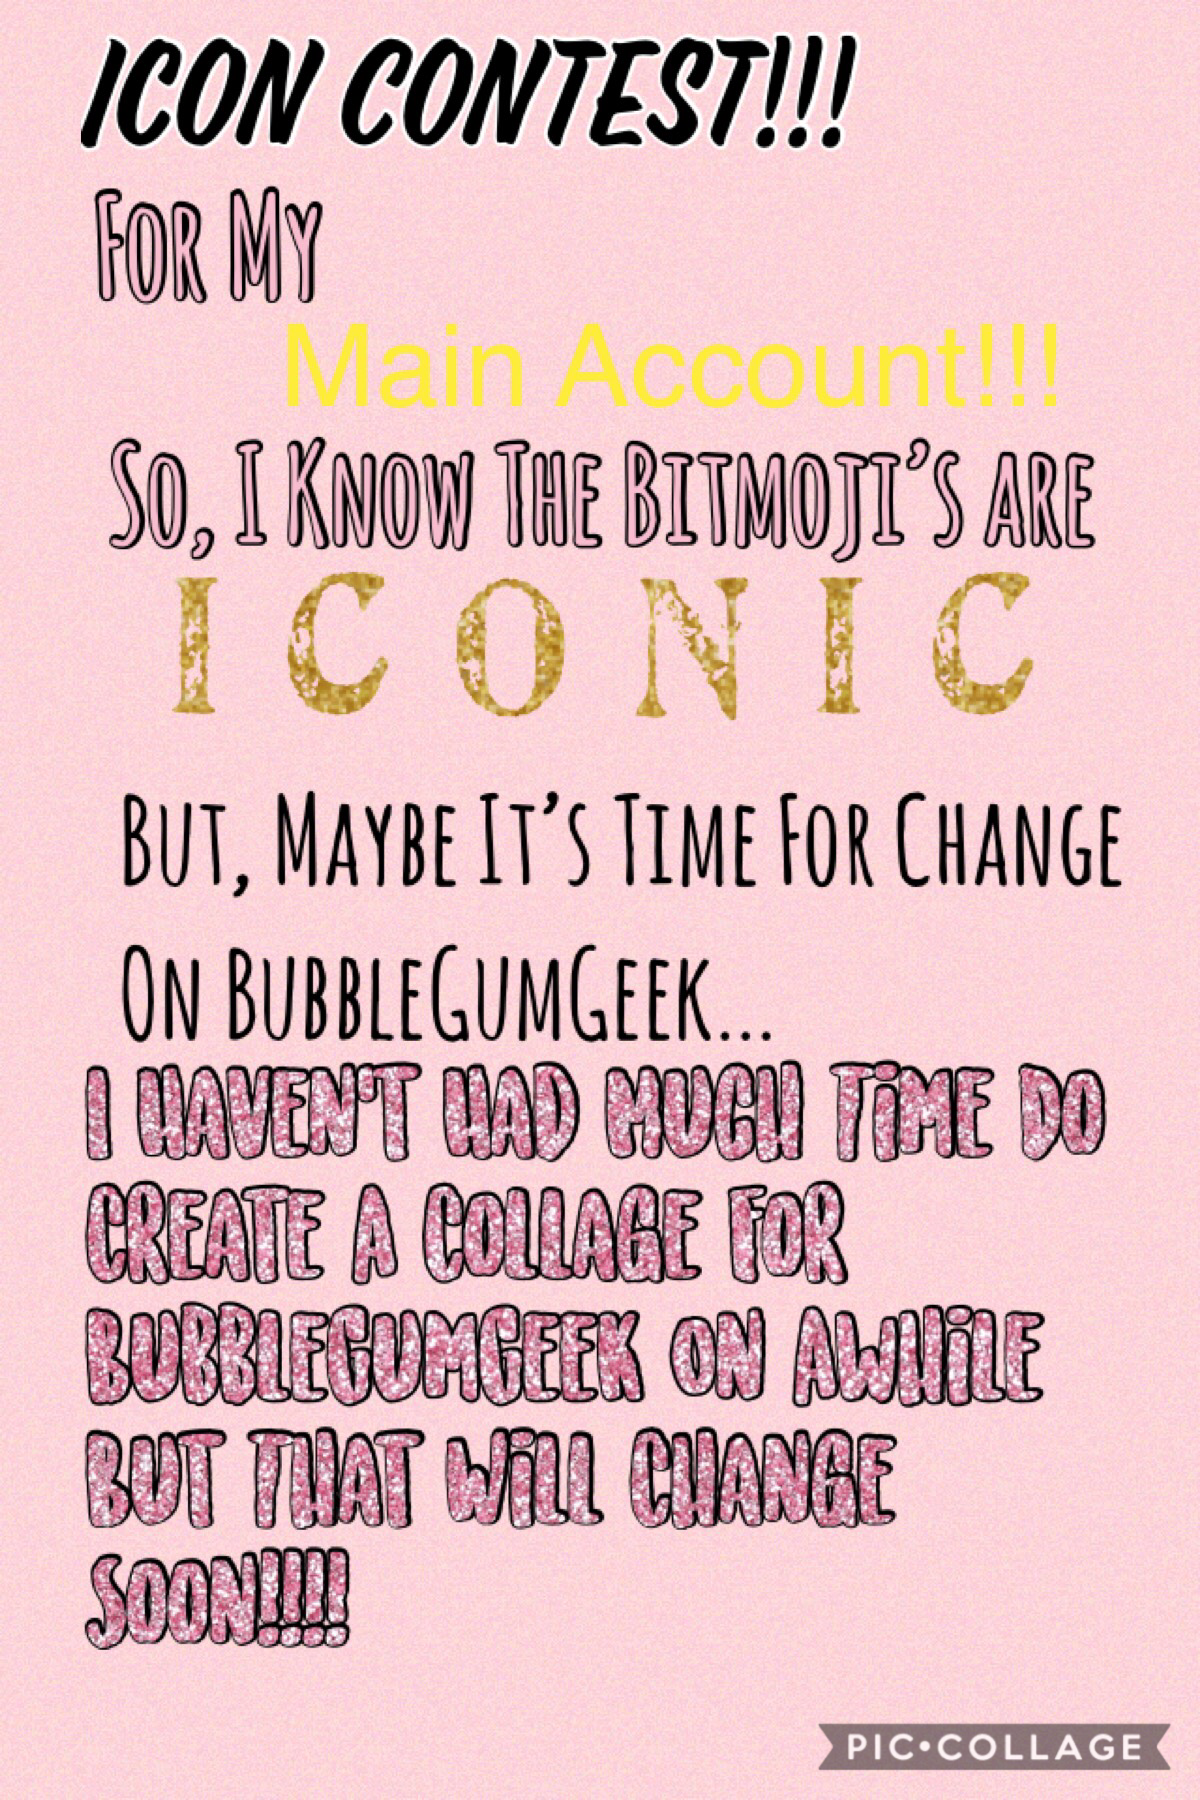 🙃Tap For Info🙃
The Icon Can Be Whatever You Think Is Best🙂
The Only Requirement is That It Has To Be Happy and Say “BubbleGumGeek” On It✍🏼
Ends May 4th.